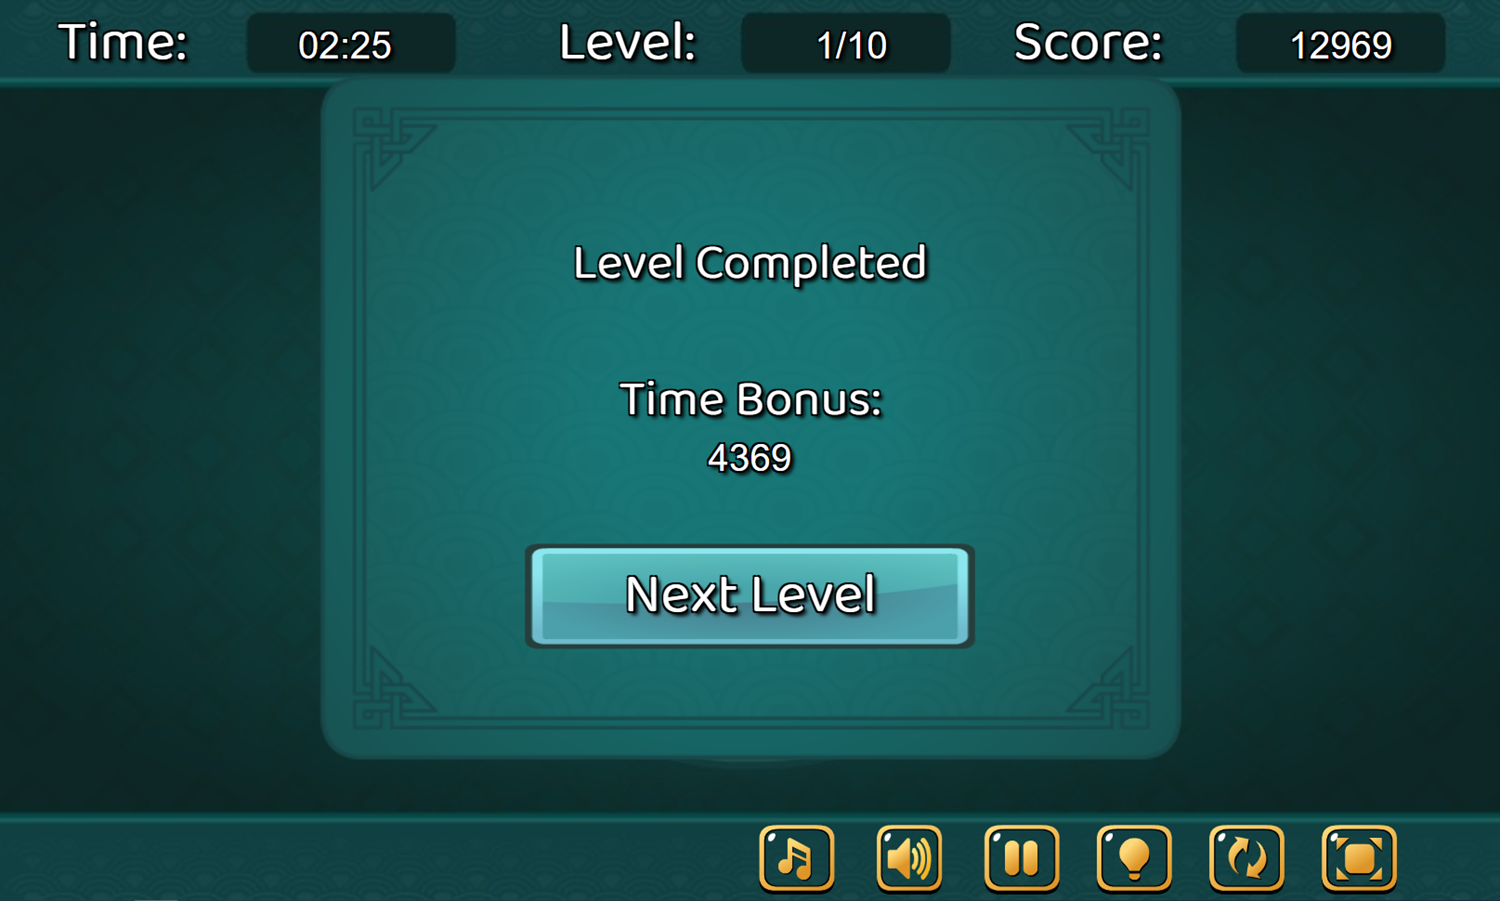 Mahjong Tower Game Level Completed Screenshot.